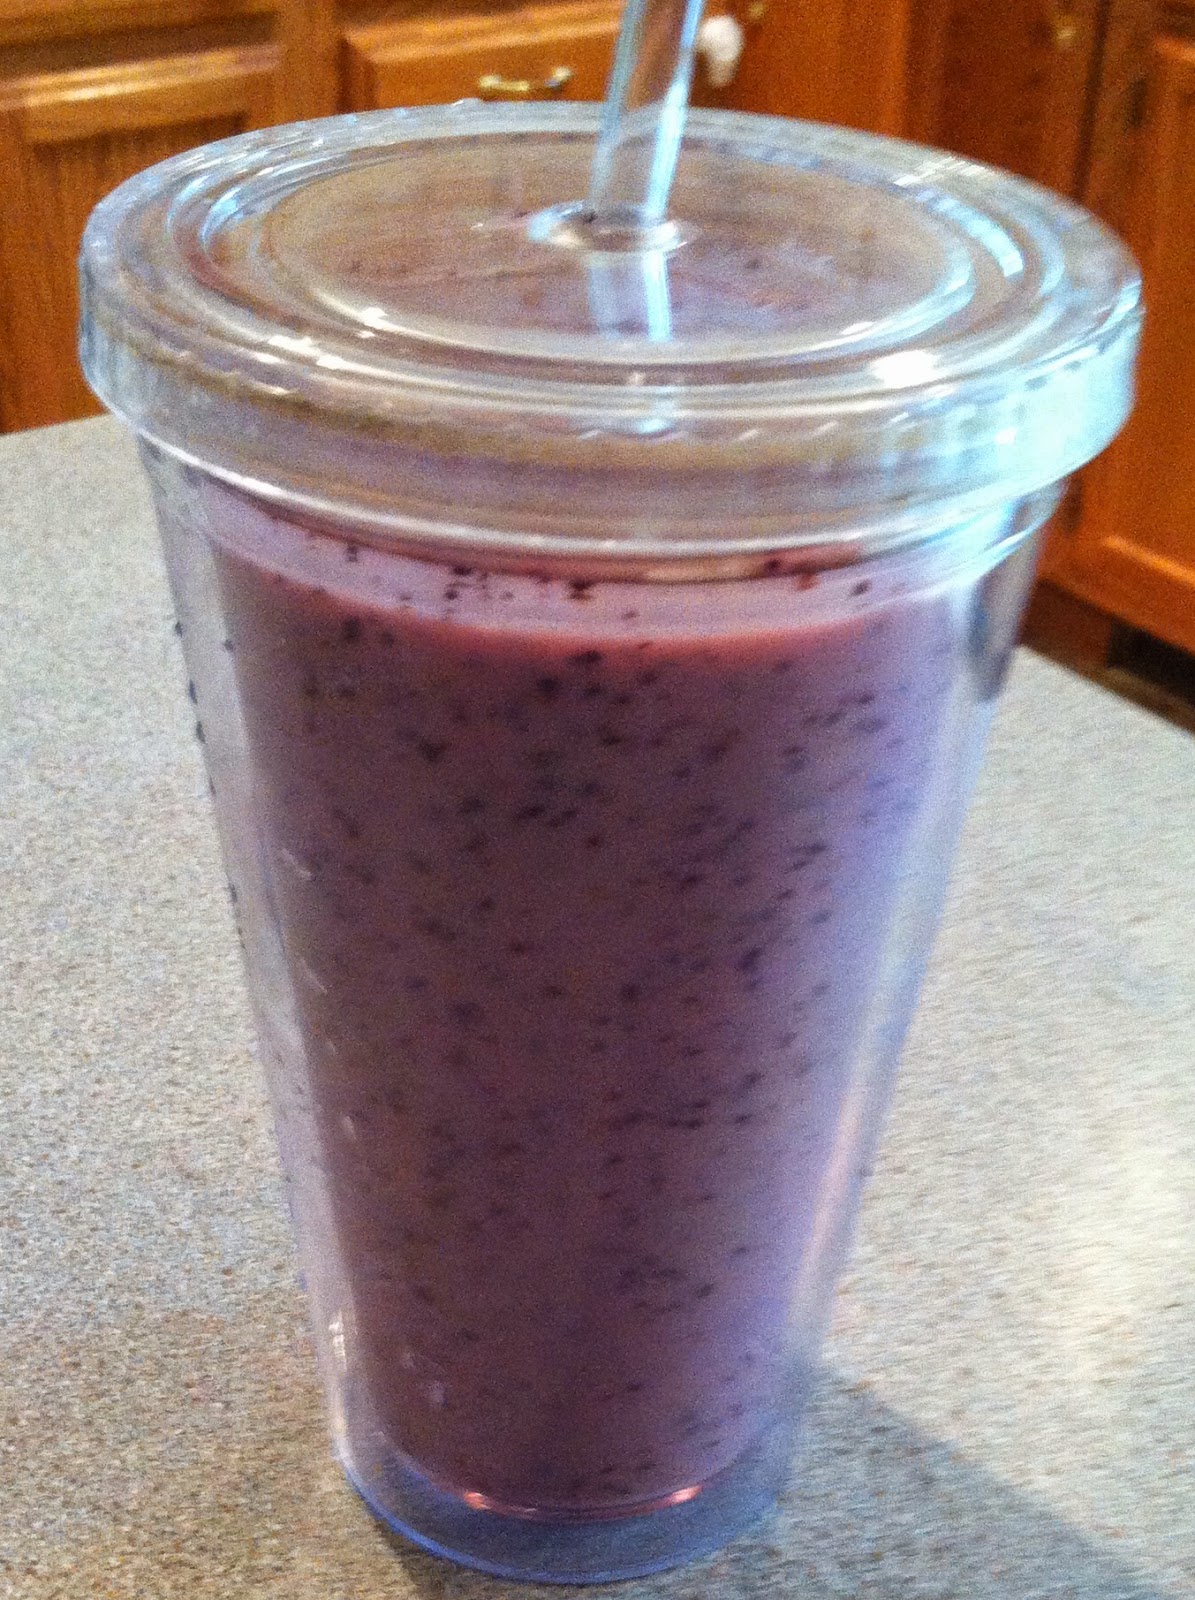 Midwest Family Food and Fun: Blueberry Banana Blast